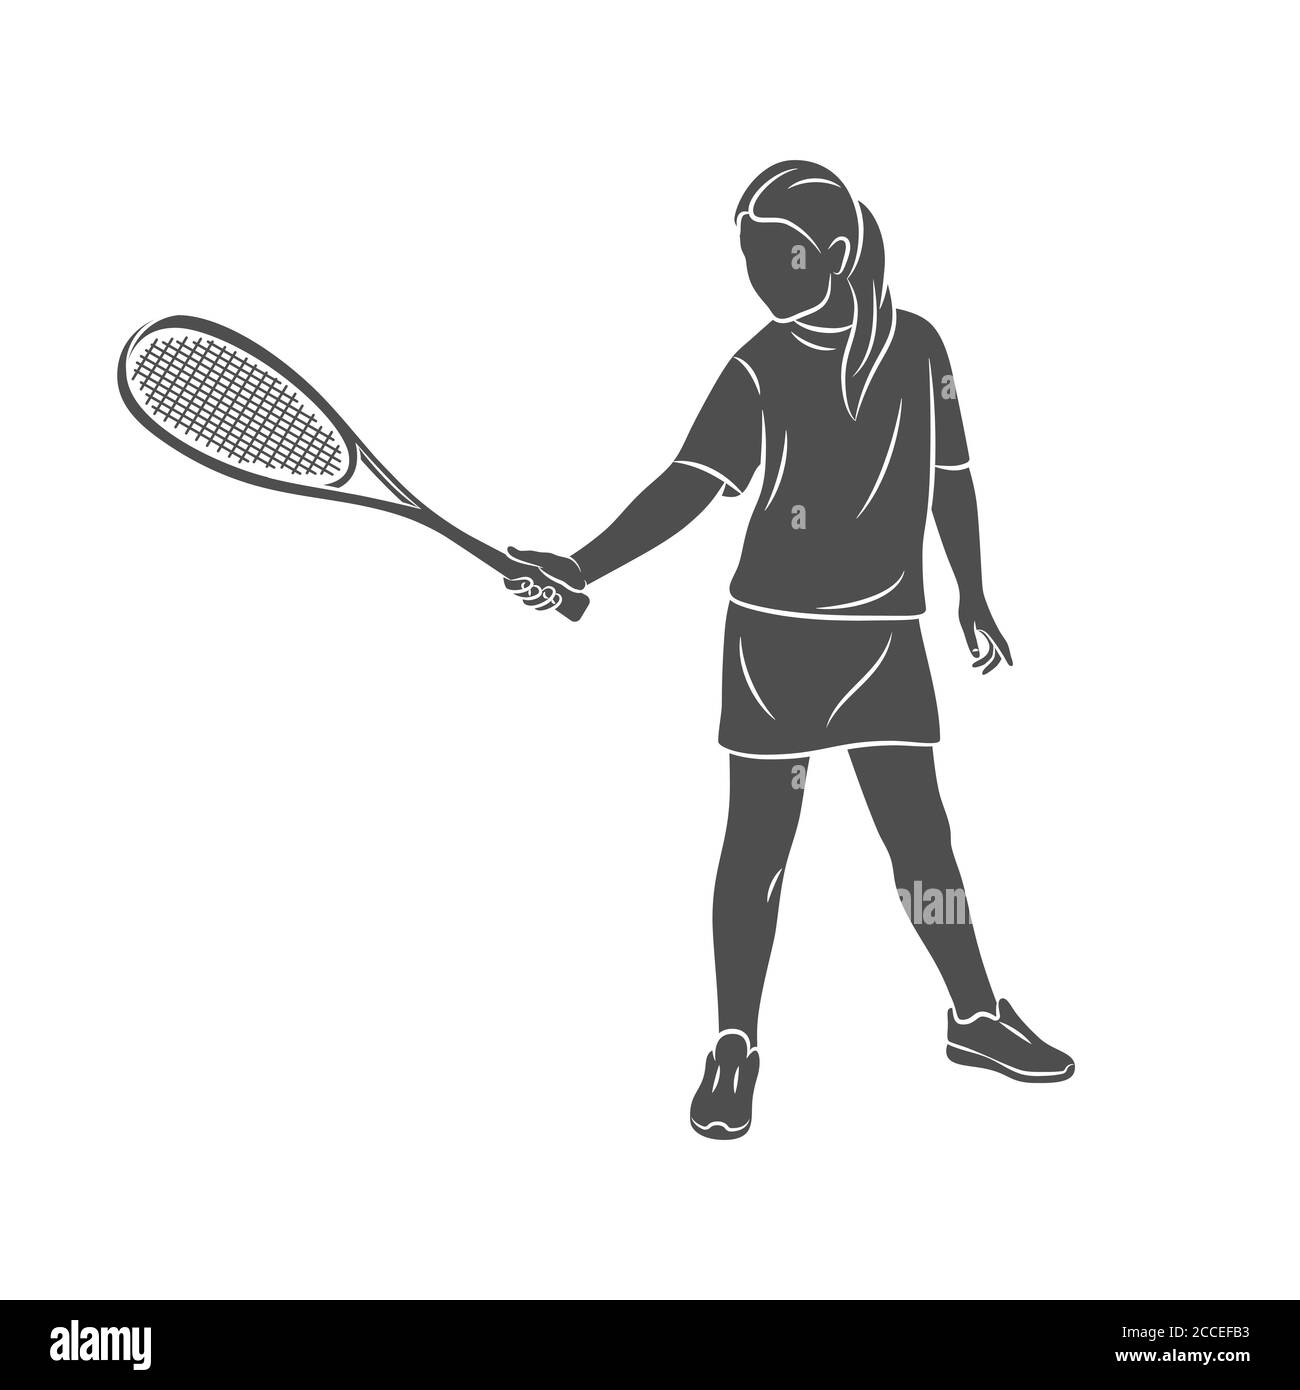 Young woman does an exercise with a racket on her right hand in squash. Squash game training Stock Vector